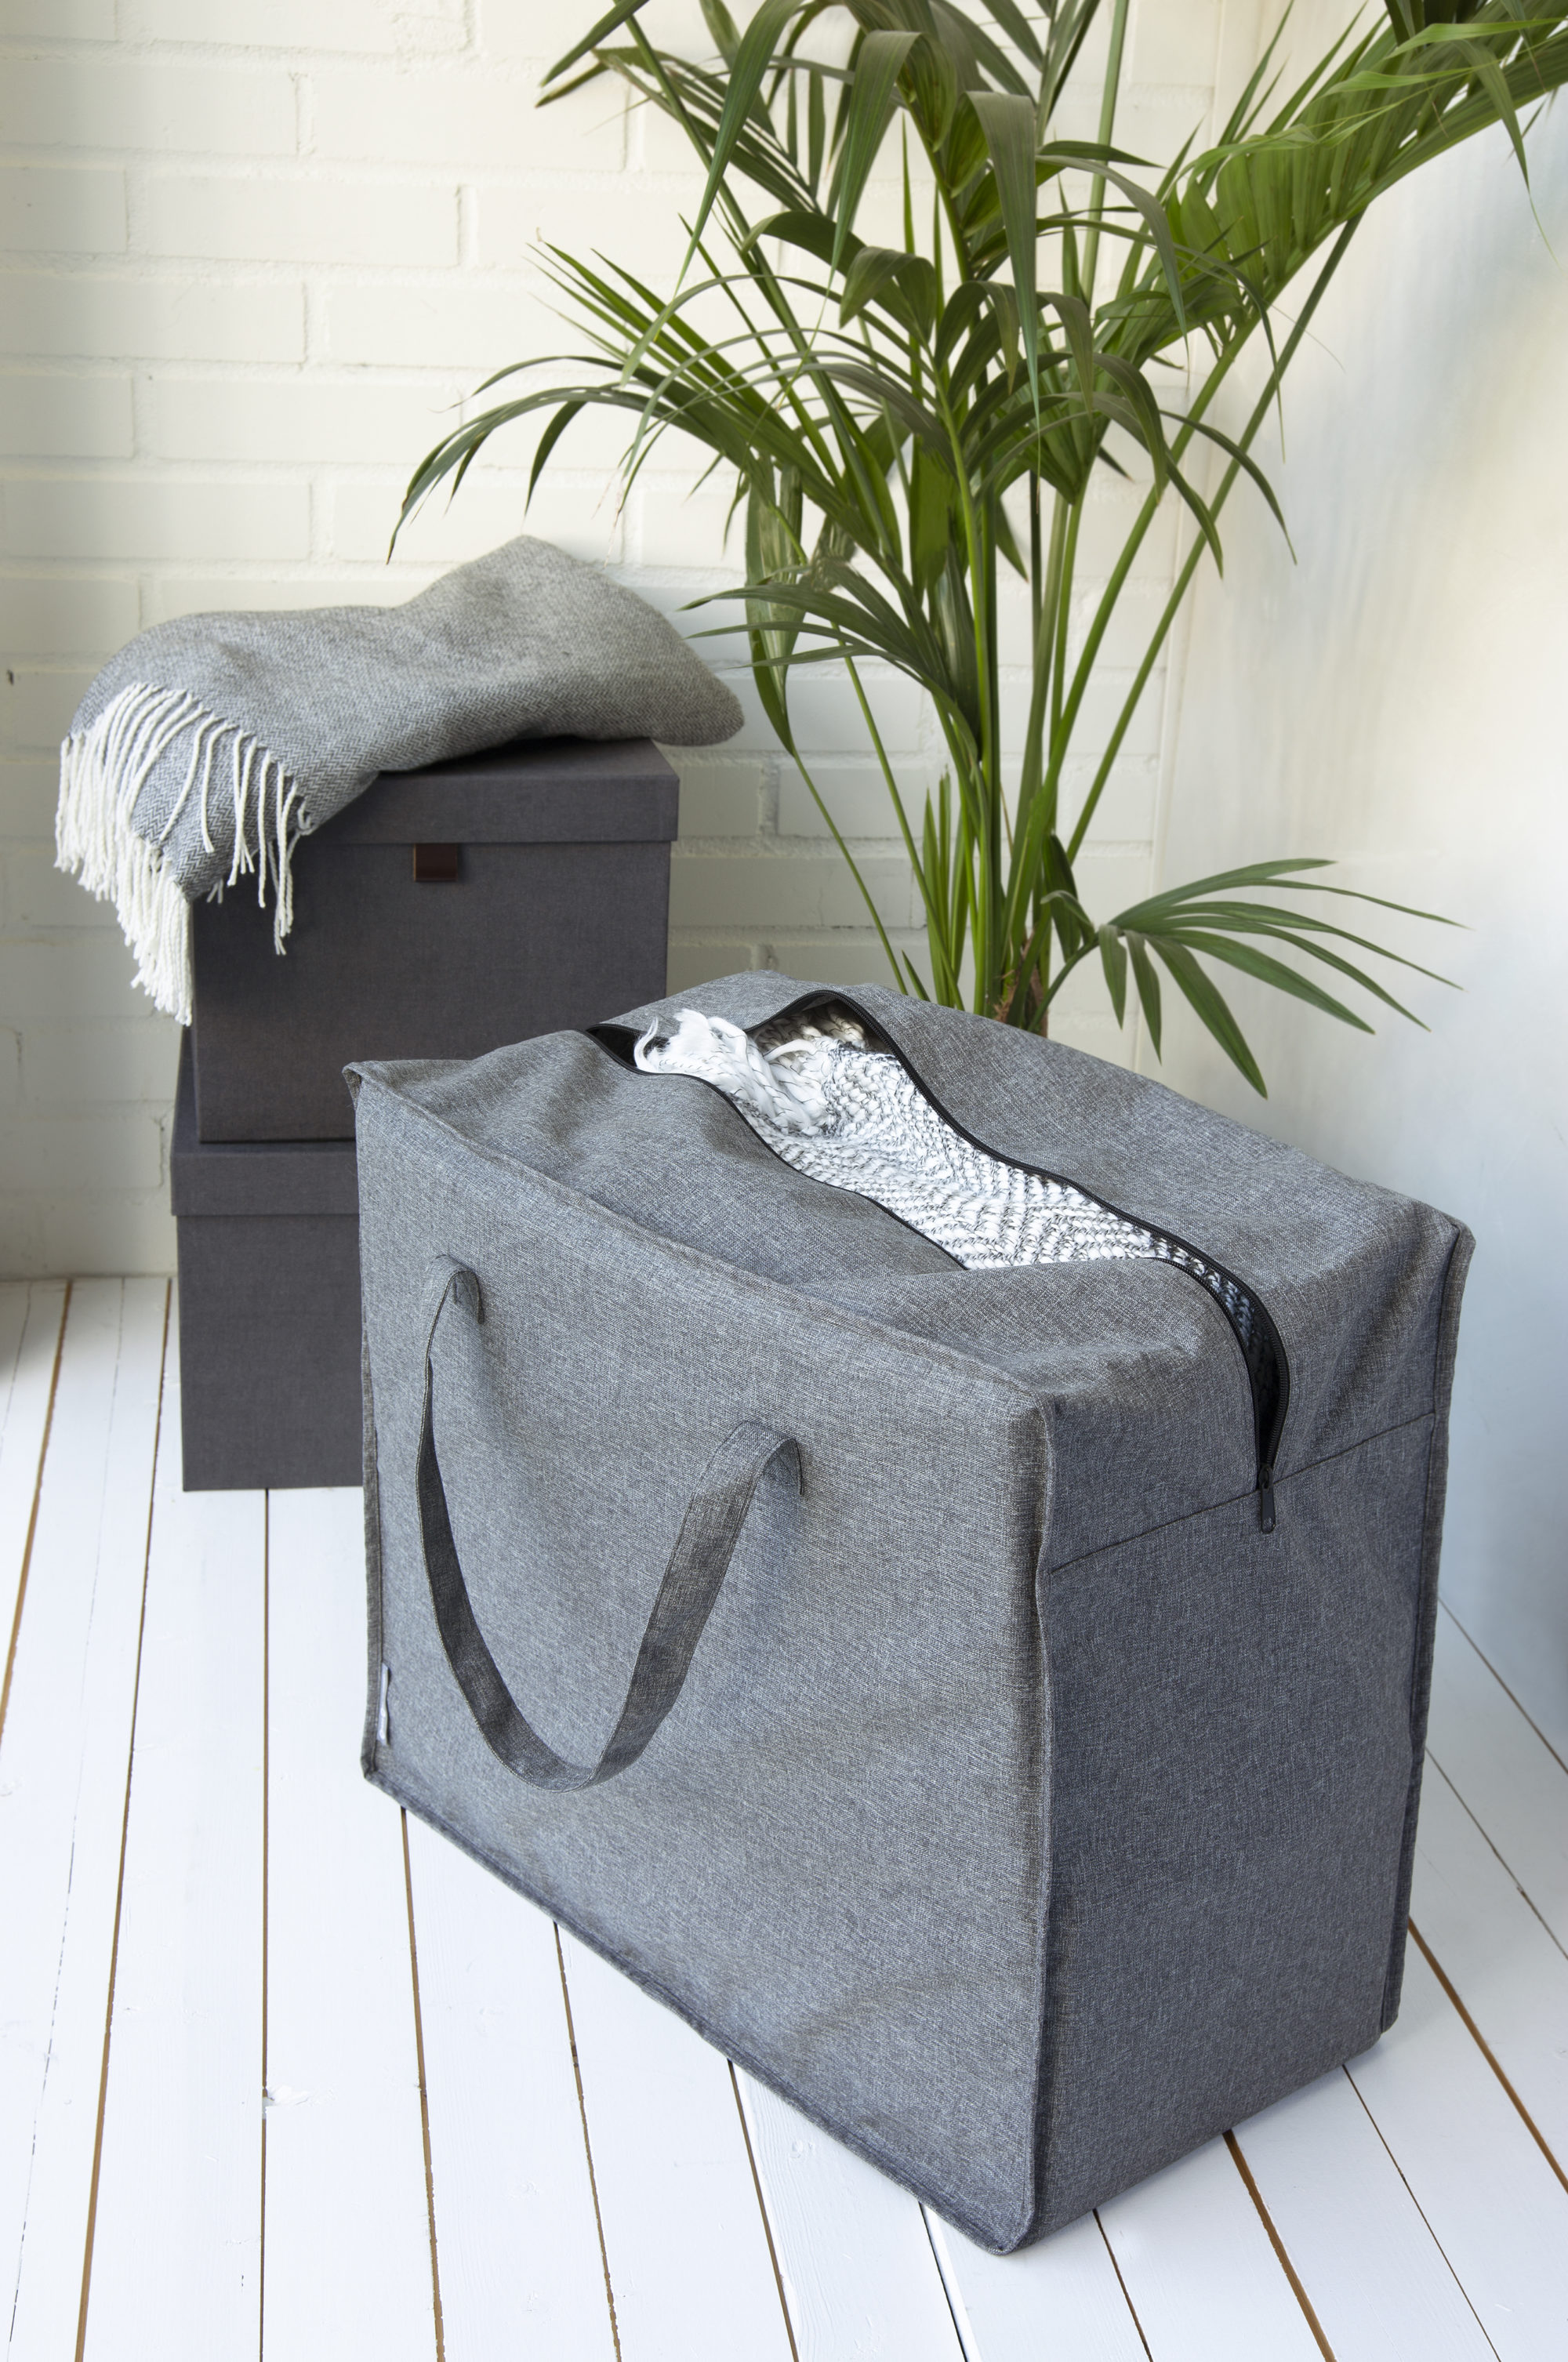 Bigso Soft Storage Boxes with Handles